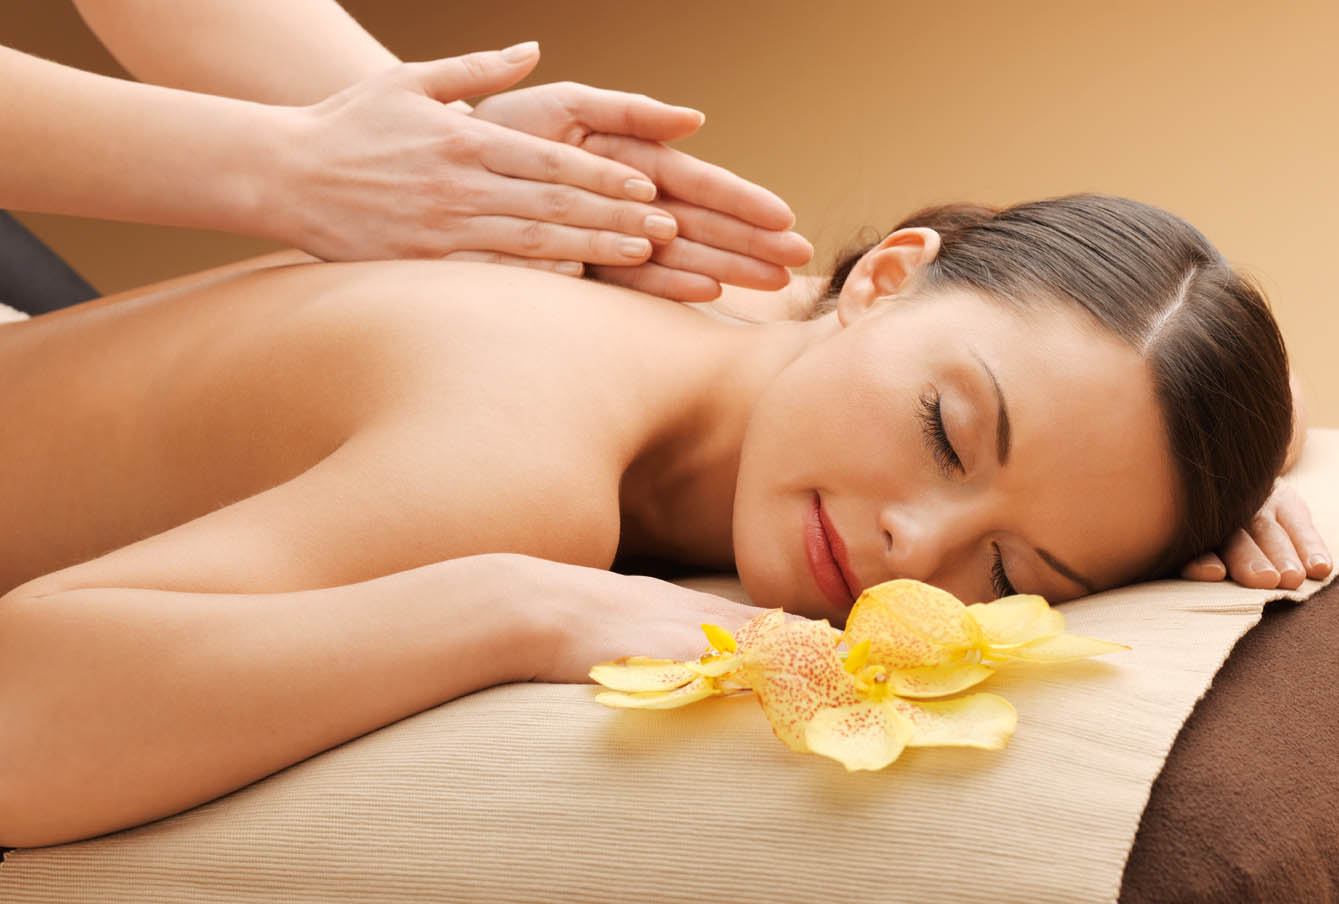 A woman having a massage during a relaxing spa day